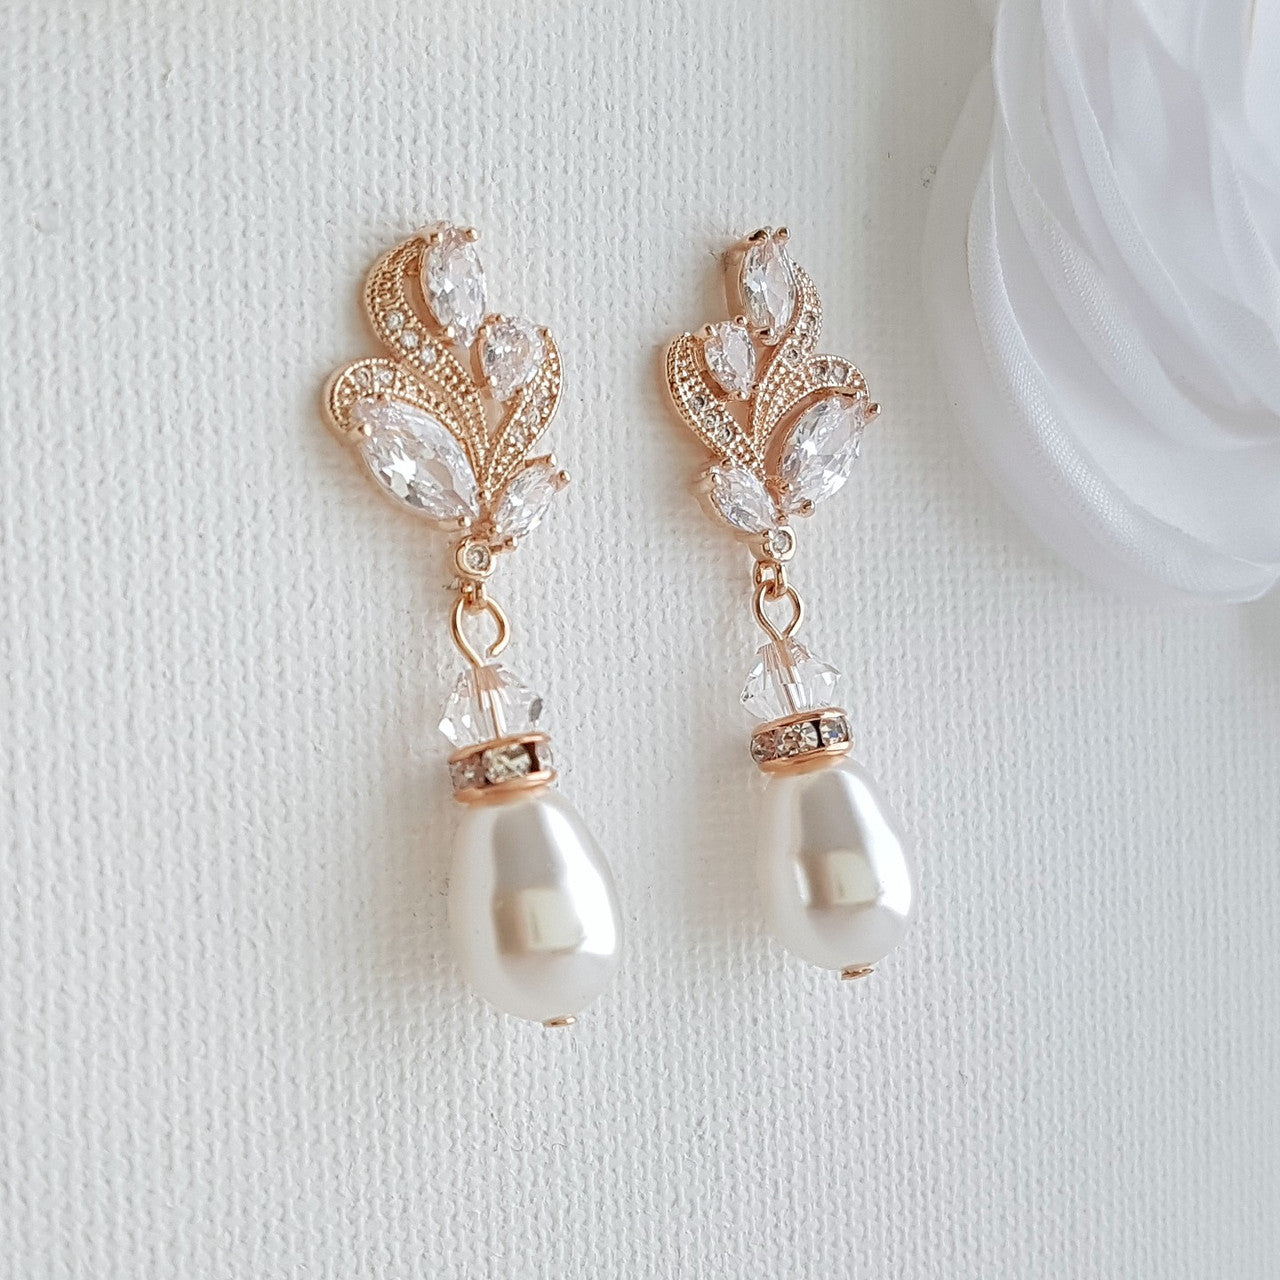 Gold Bridal Earrings With Pearl Drops-Wavy